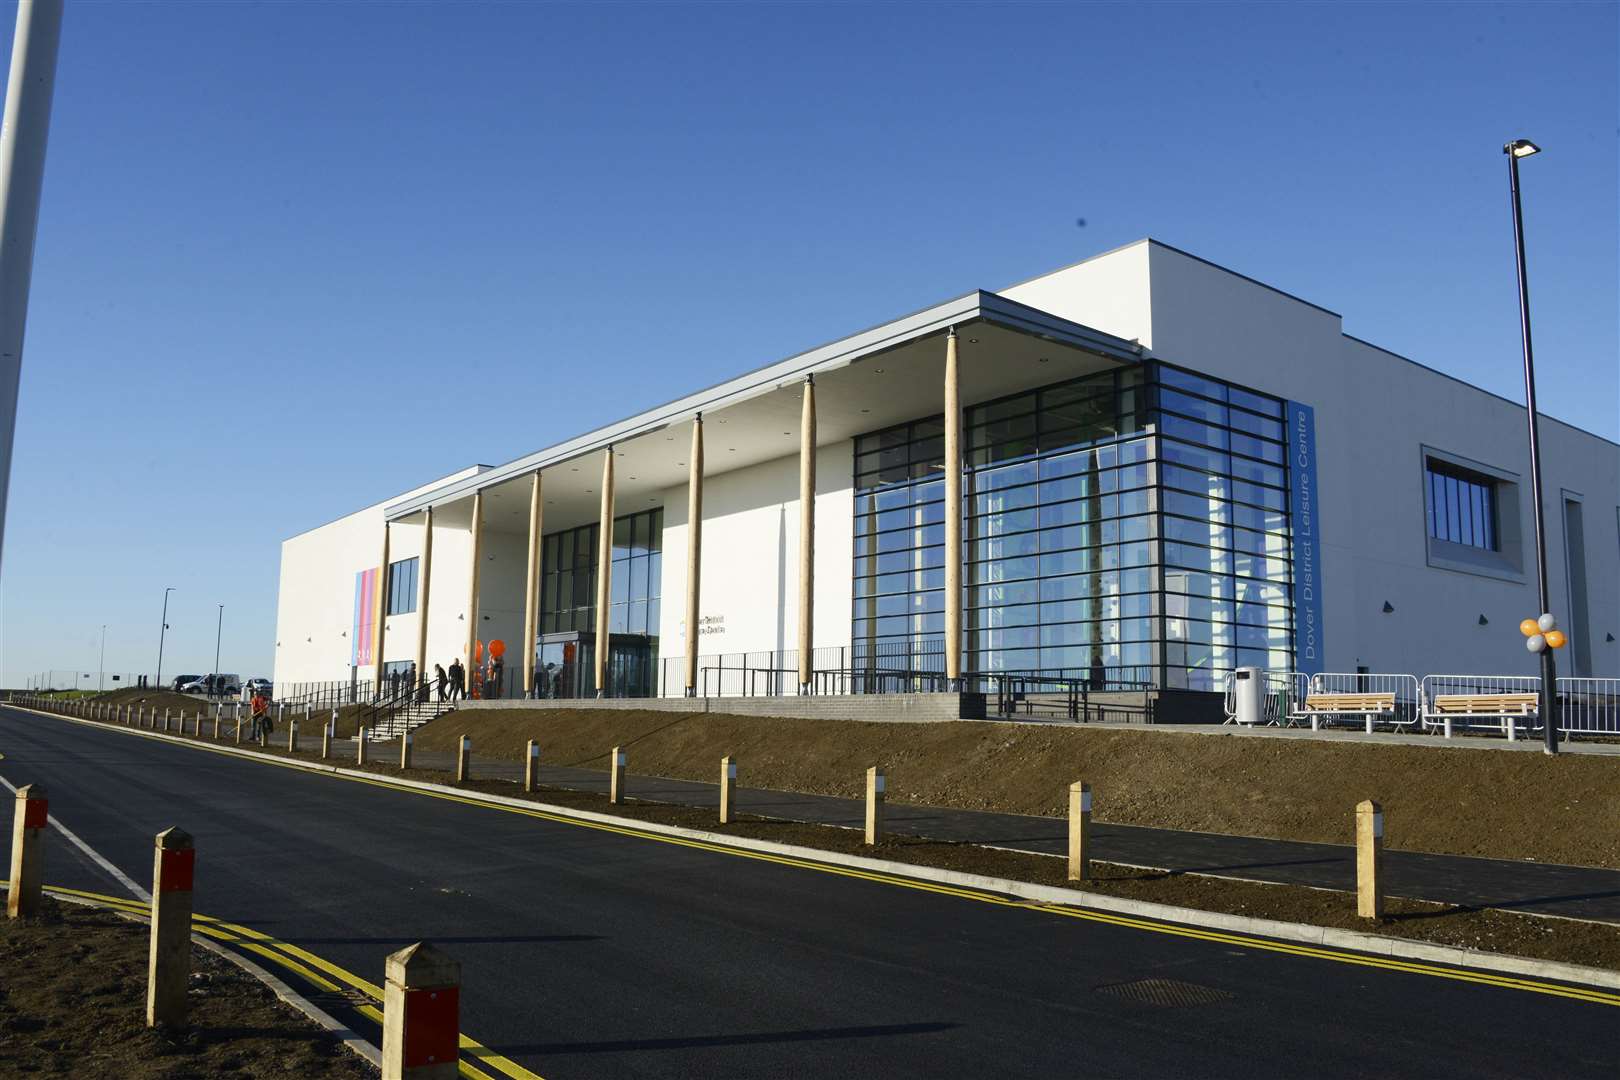 The new Whitfield Leisure Centre has opened